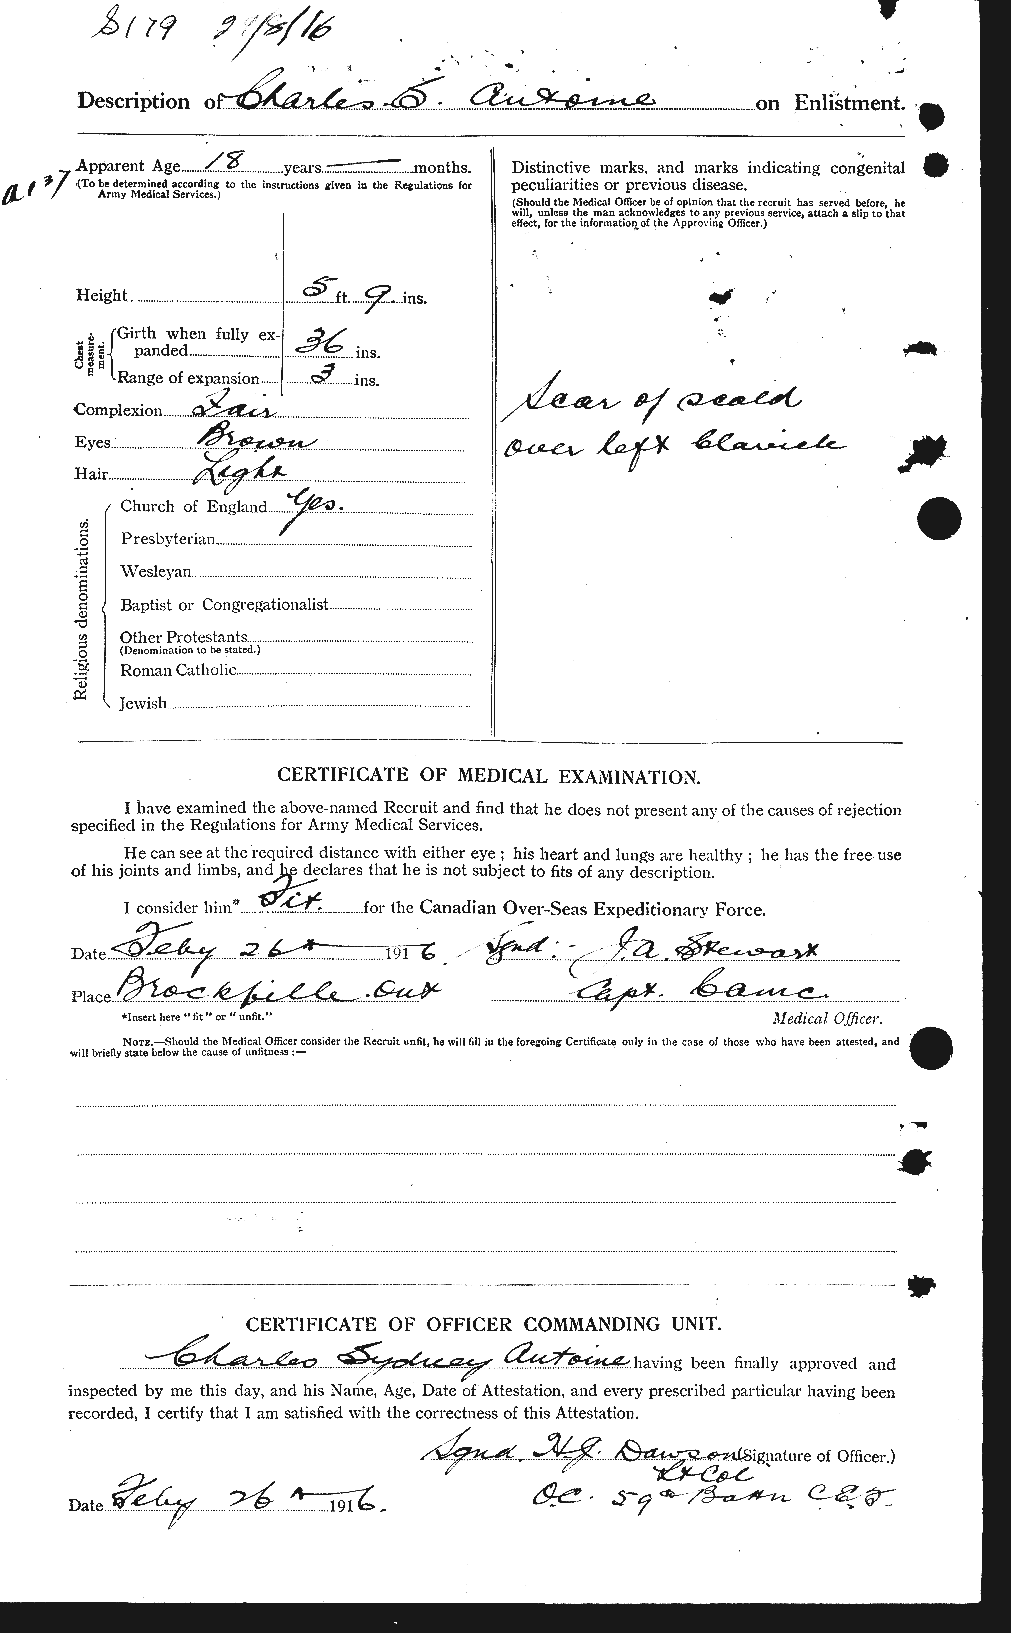 Personnel Records of the First World War - CEF 212120b